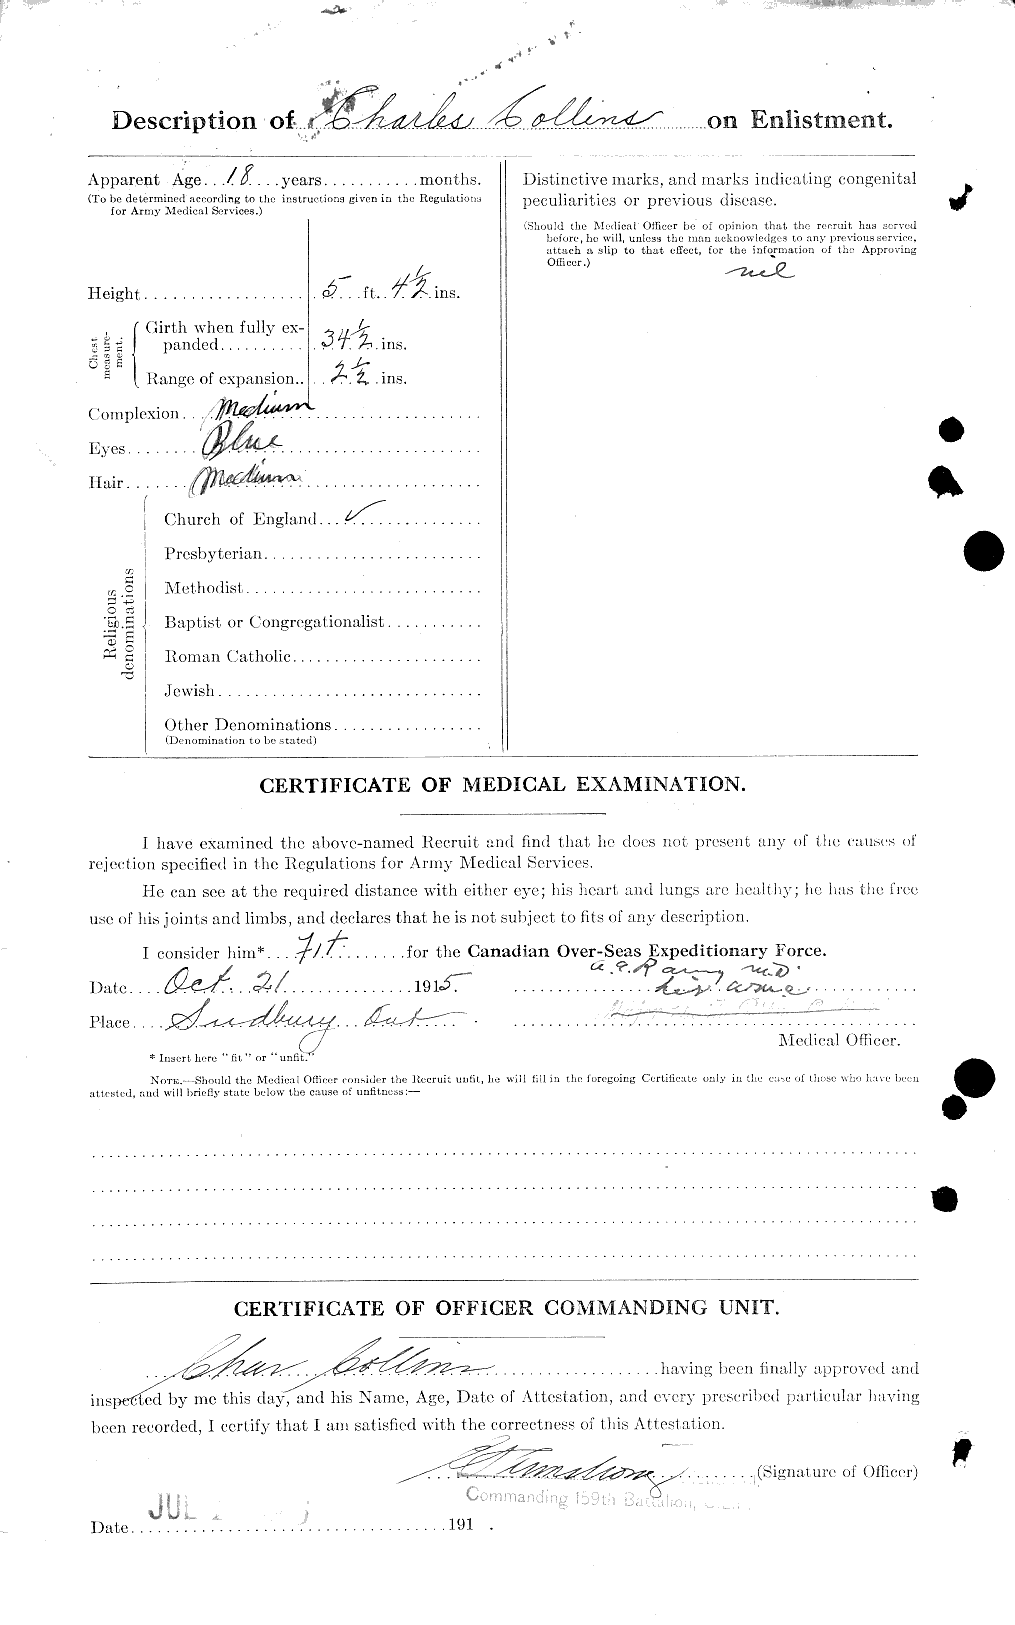 Personnel Records of the First World War - CEF 029013b